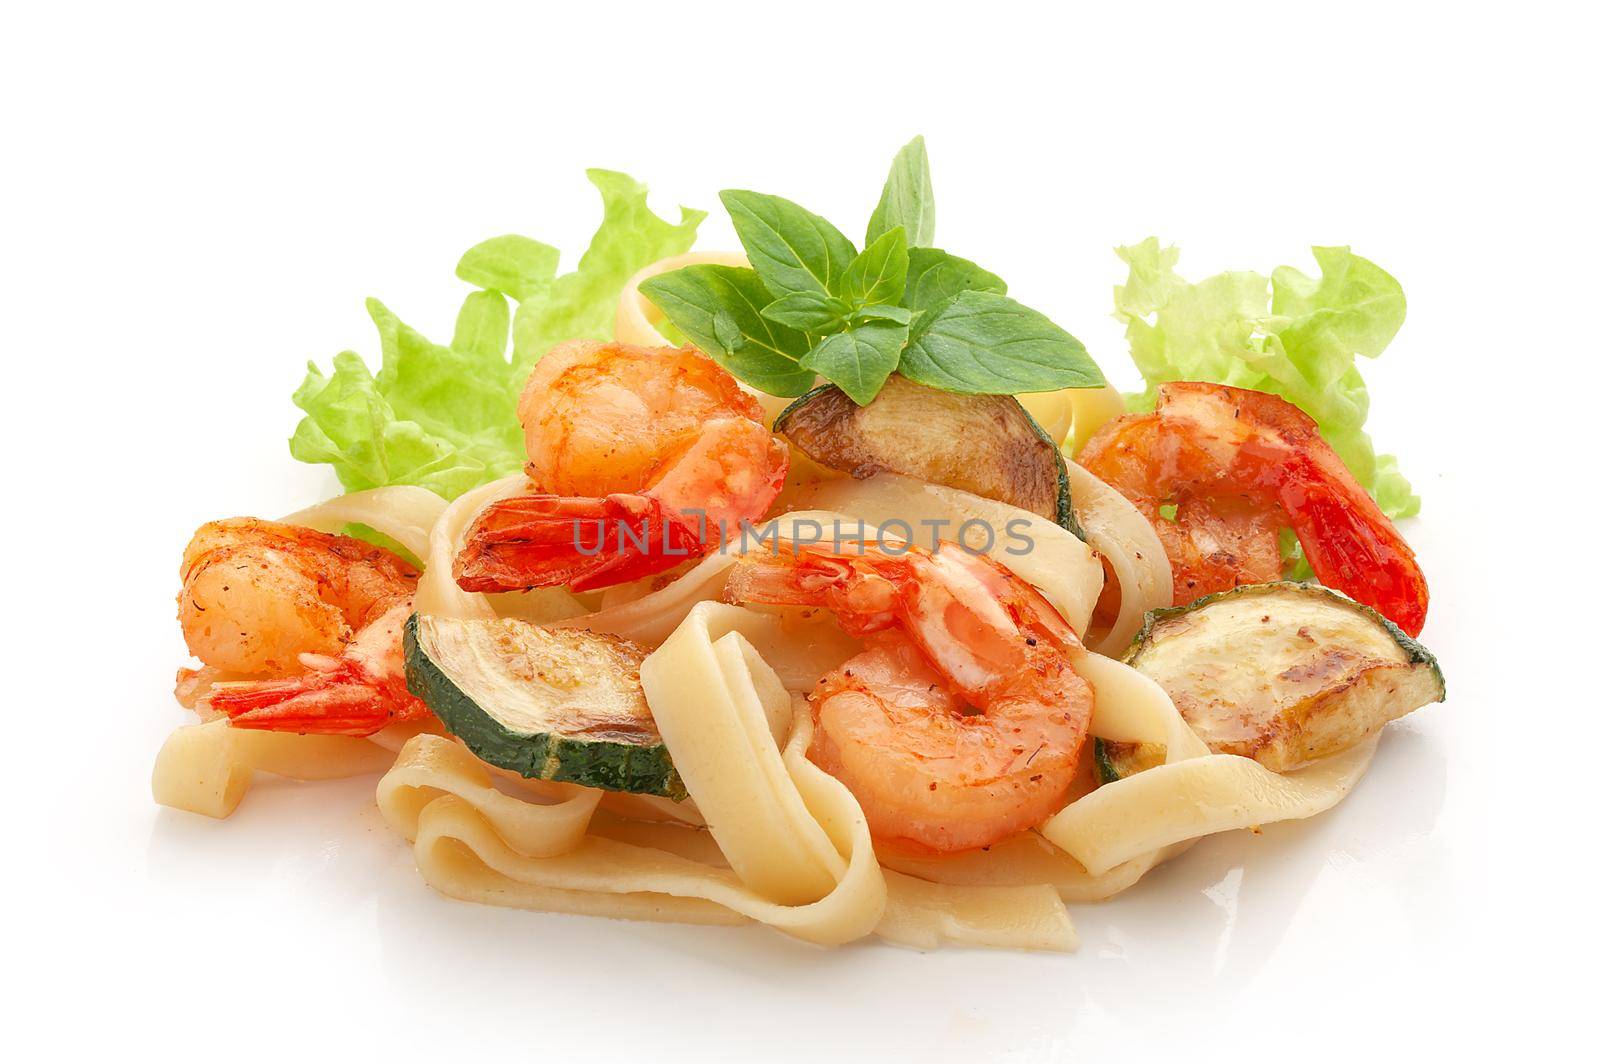 Fried shrimps with cabbage and pasta by Angorius